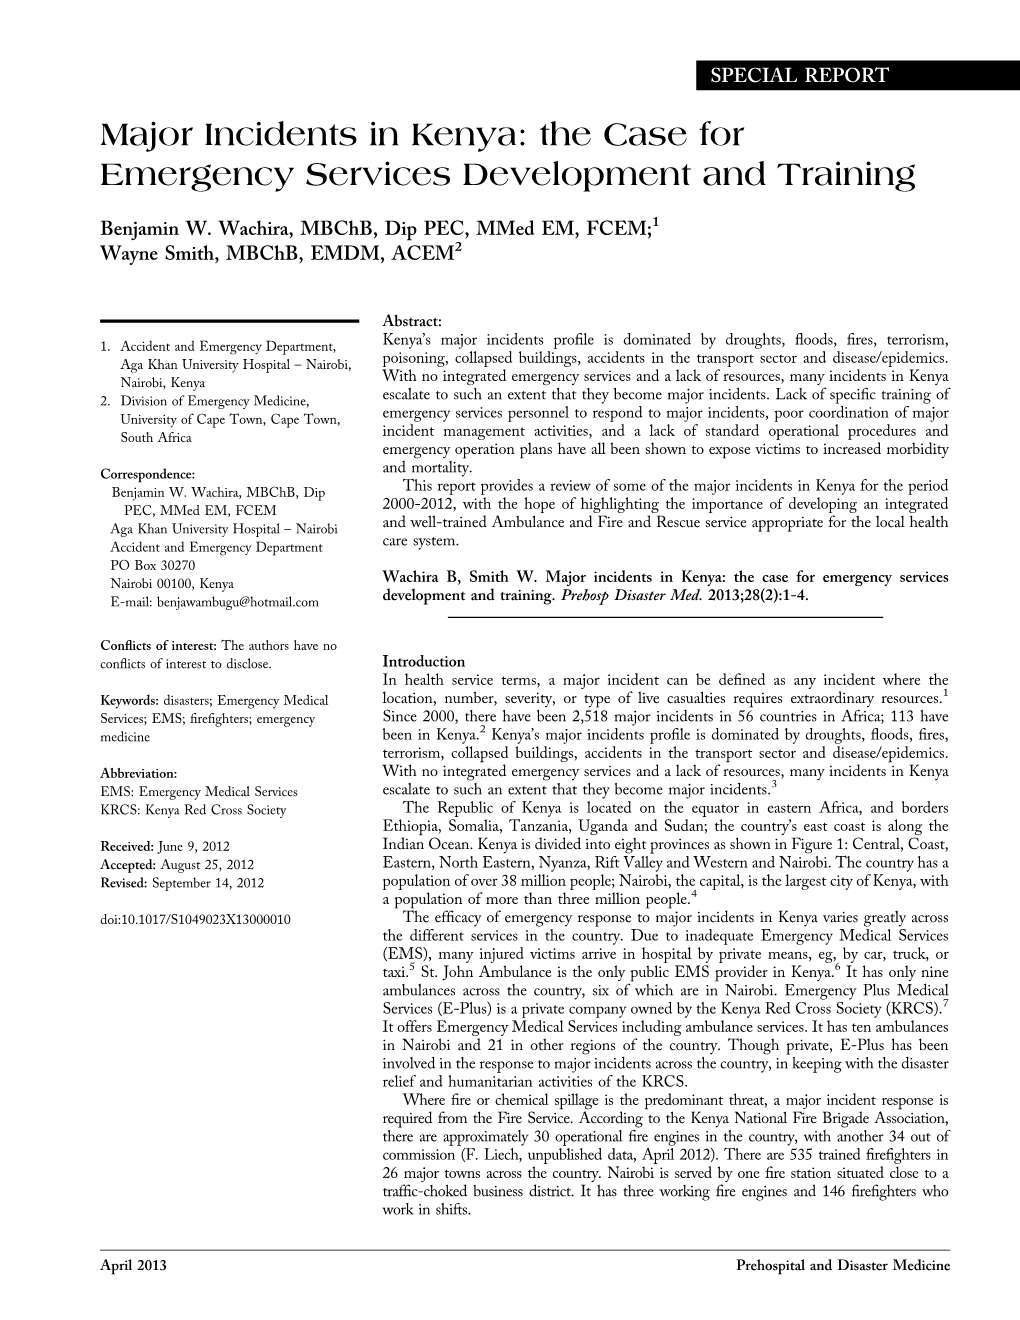 Major Incidents in Kenya: the Case for Emergency Services Development and Training